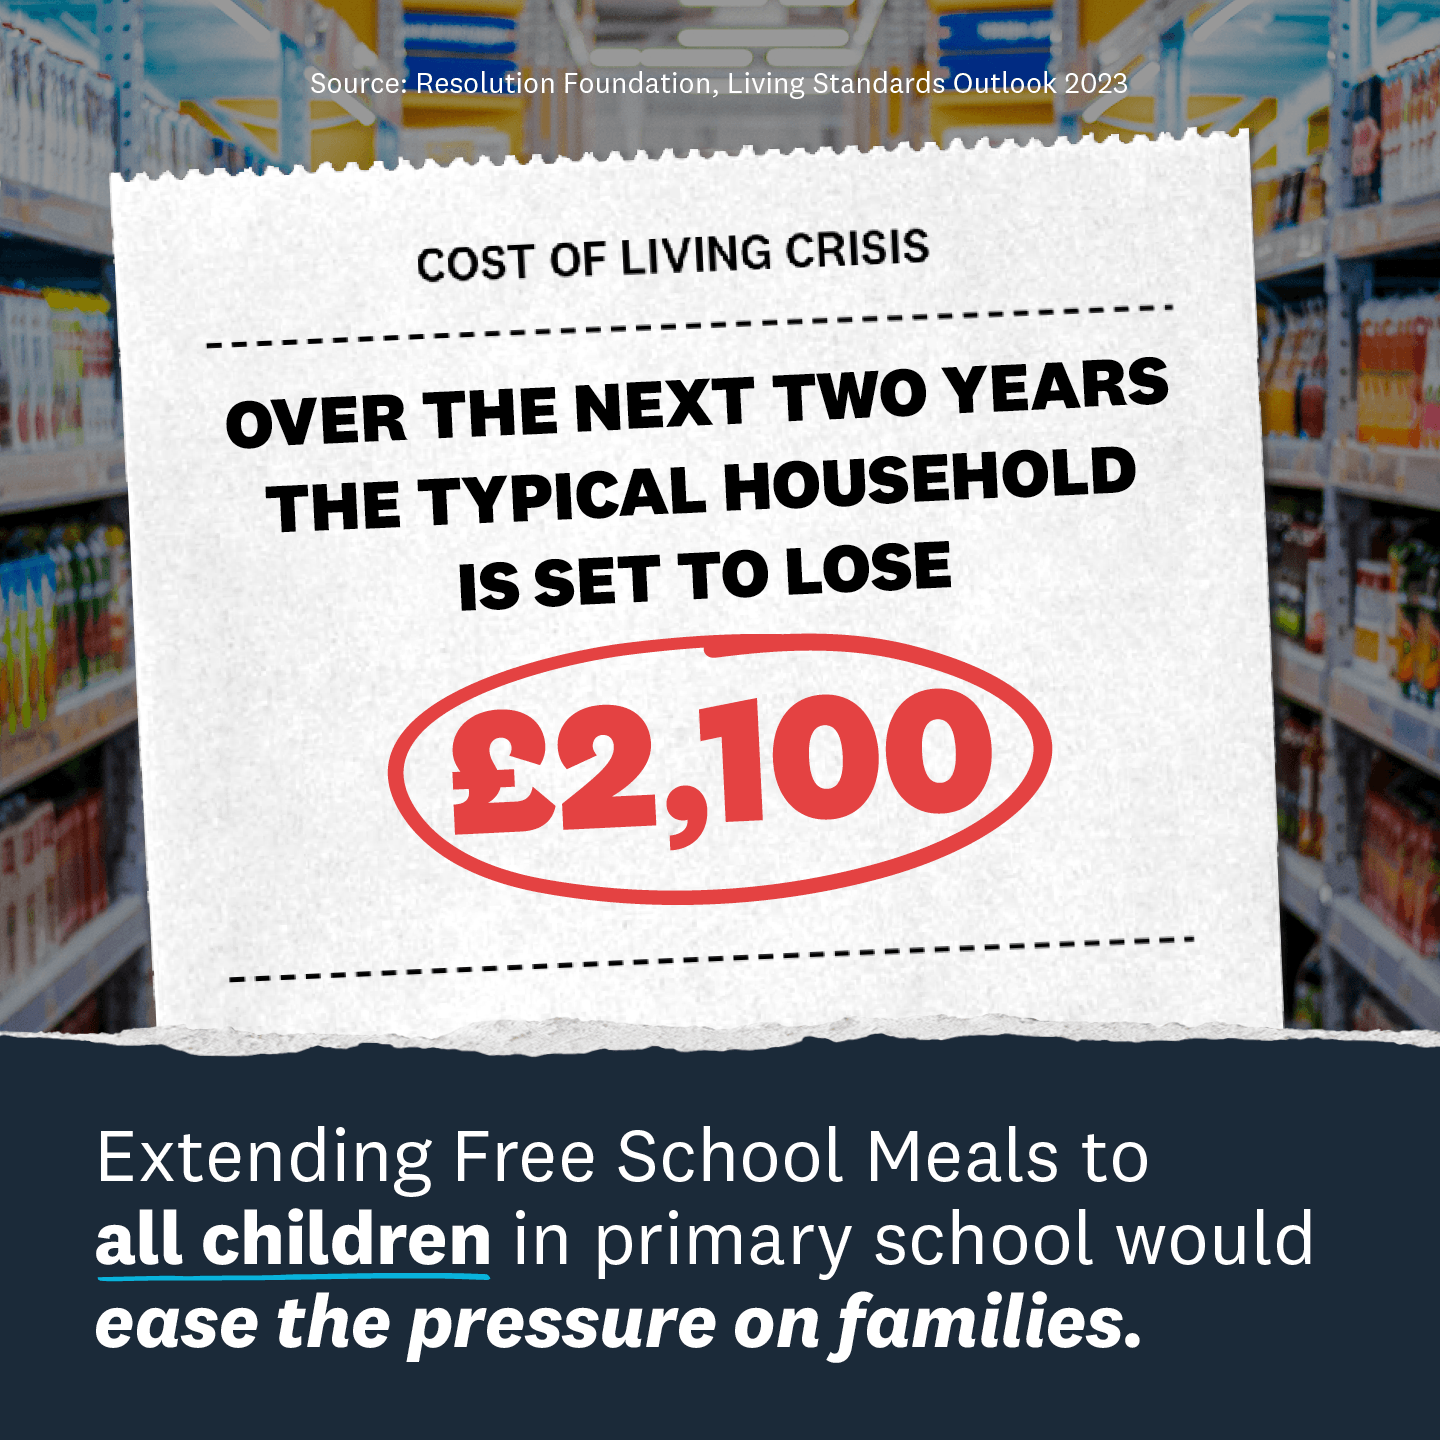 Join the movement for Free School Meals for All